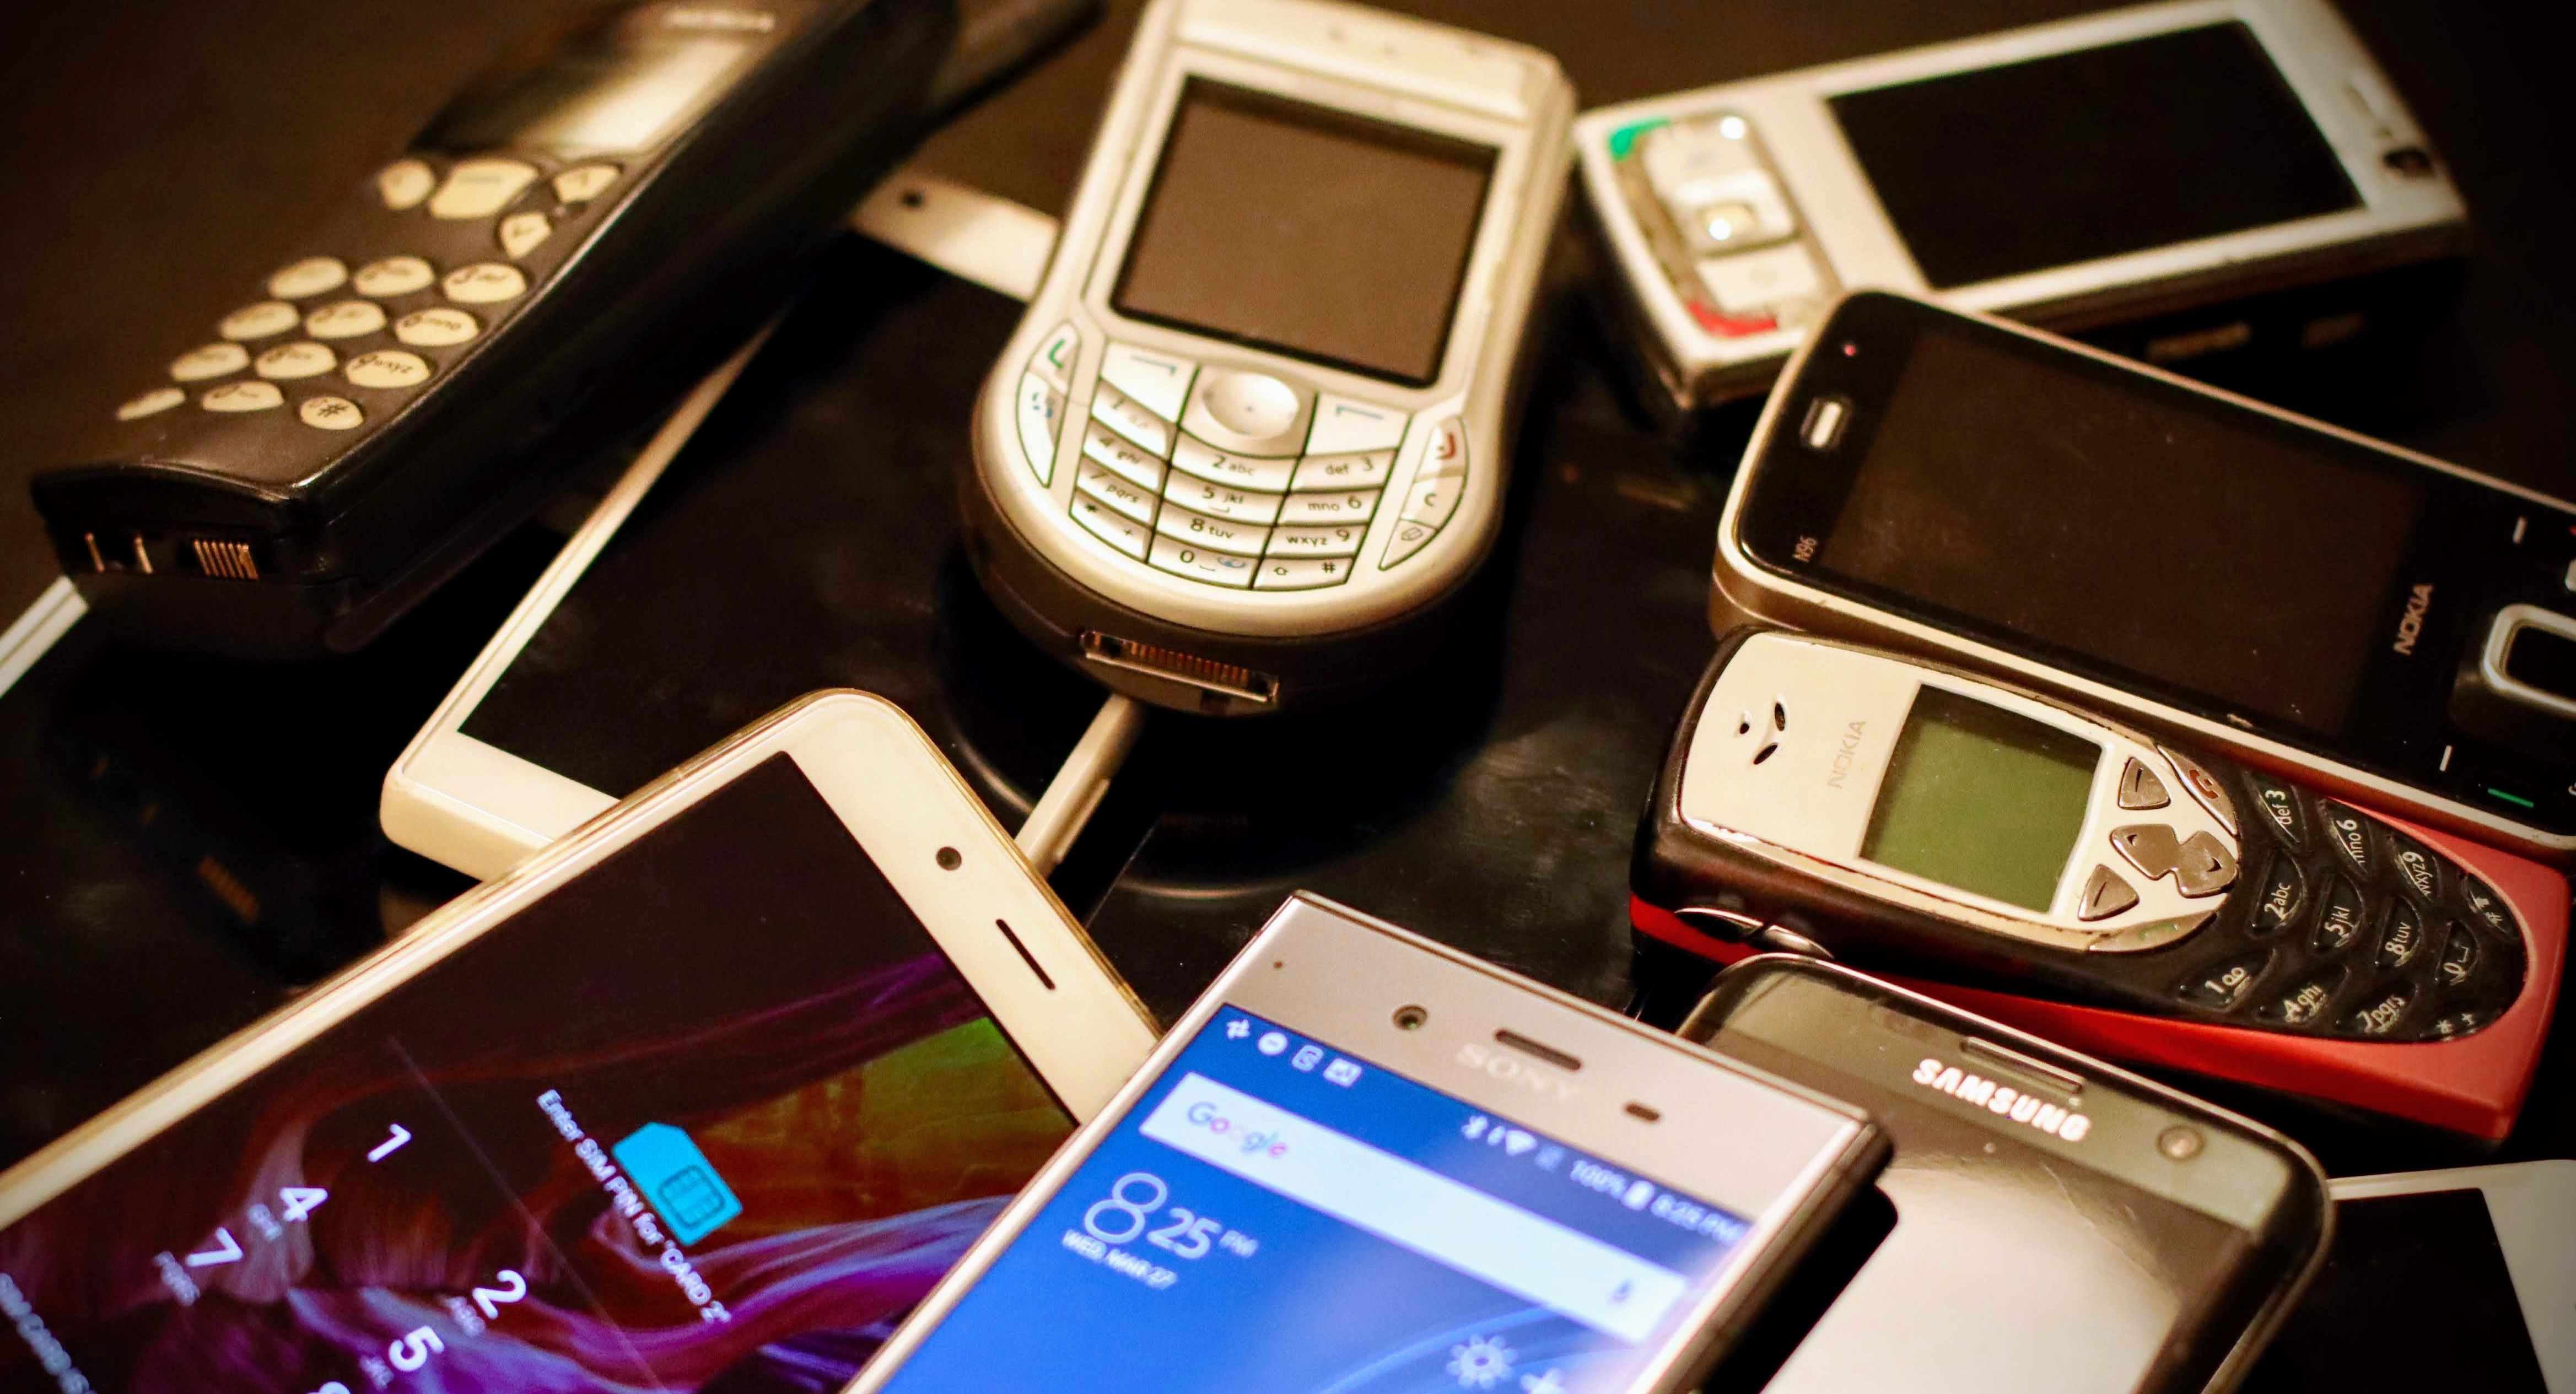 various different cell phones in a pile